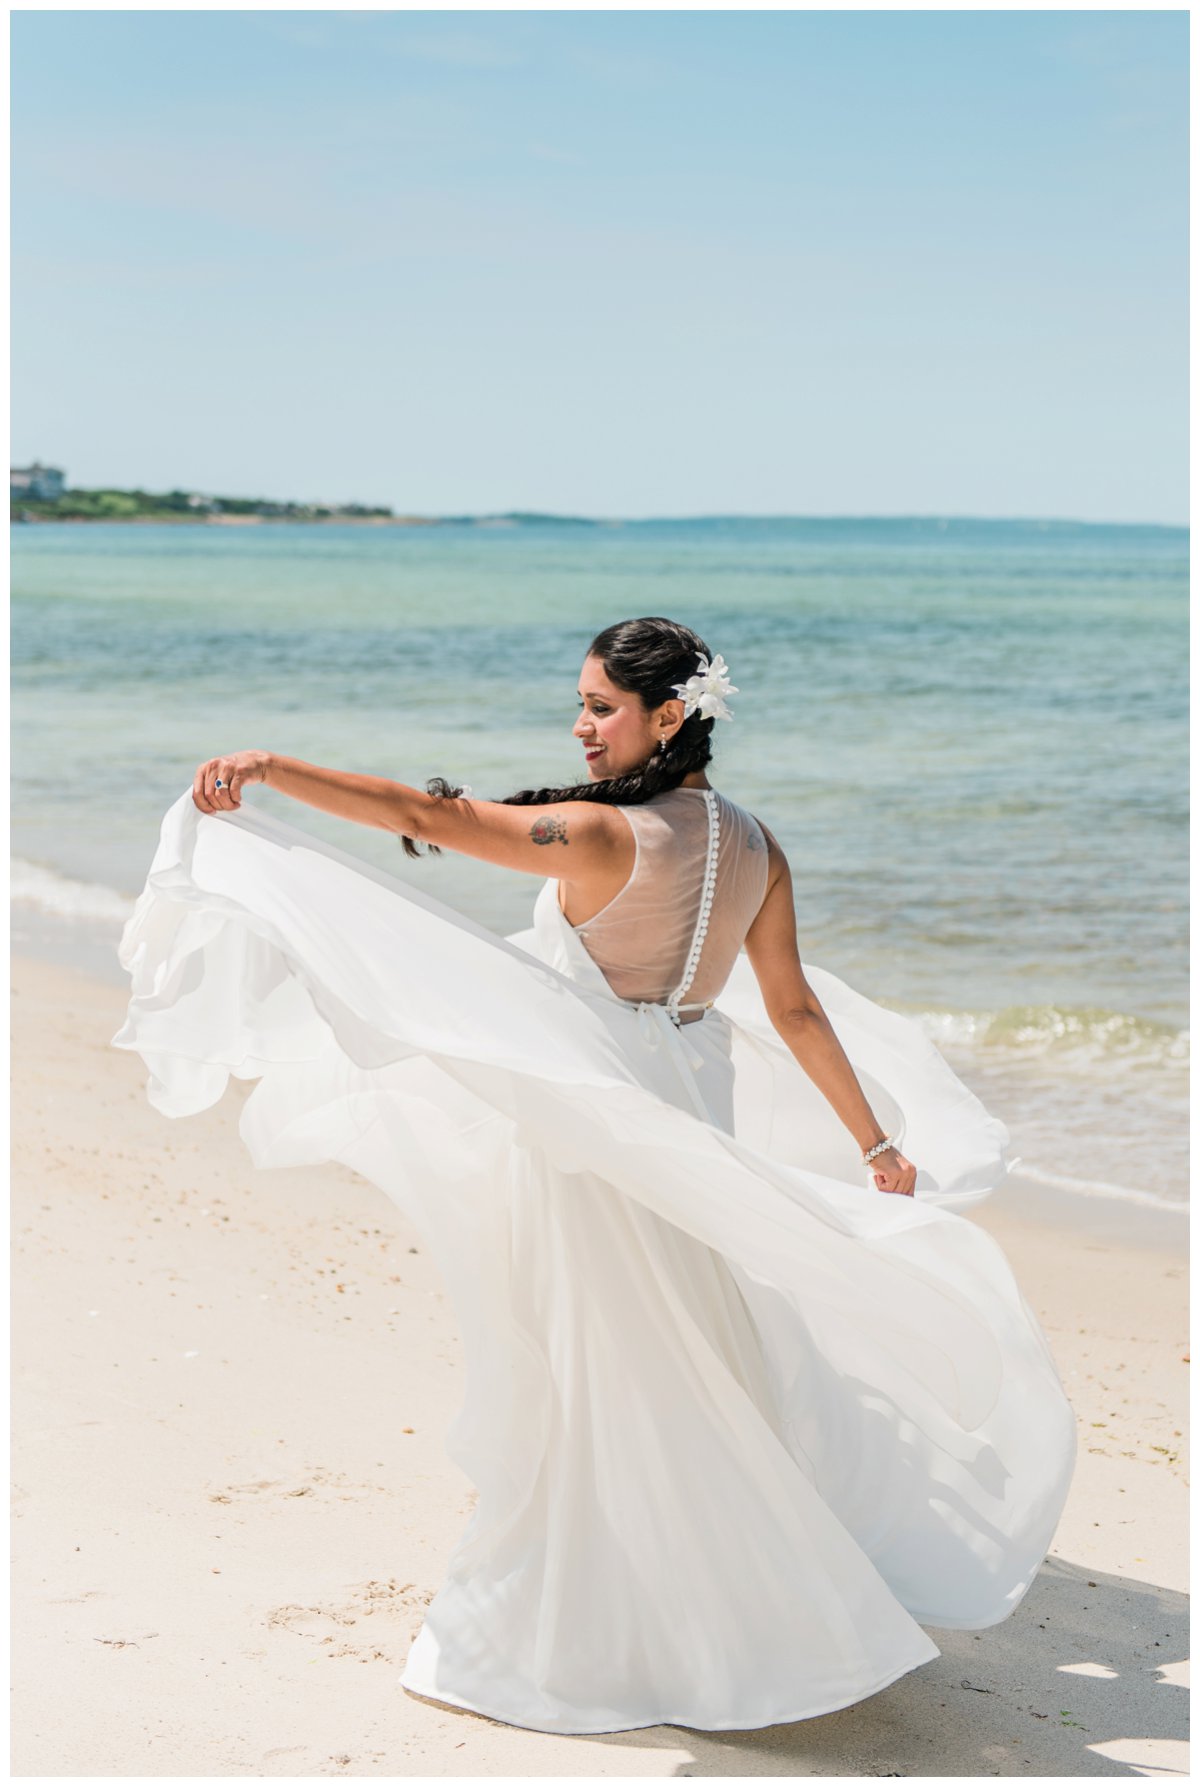 A bridal portrait on the beach in West Falmouth Massachusetts